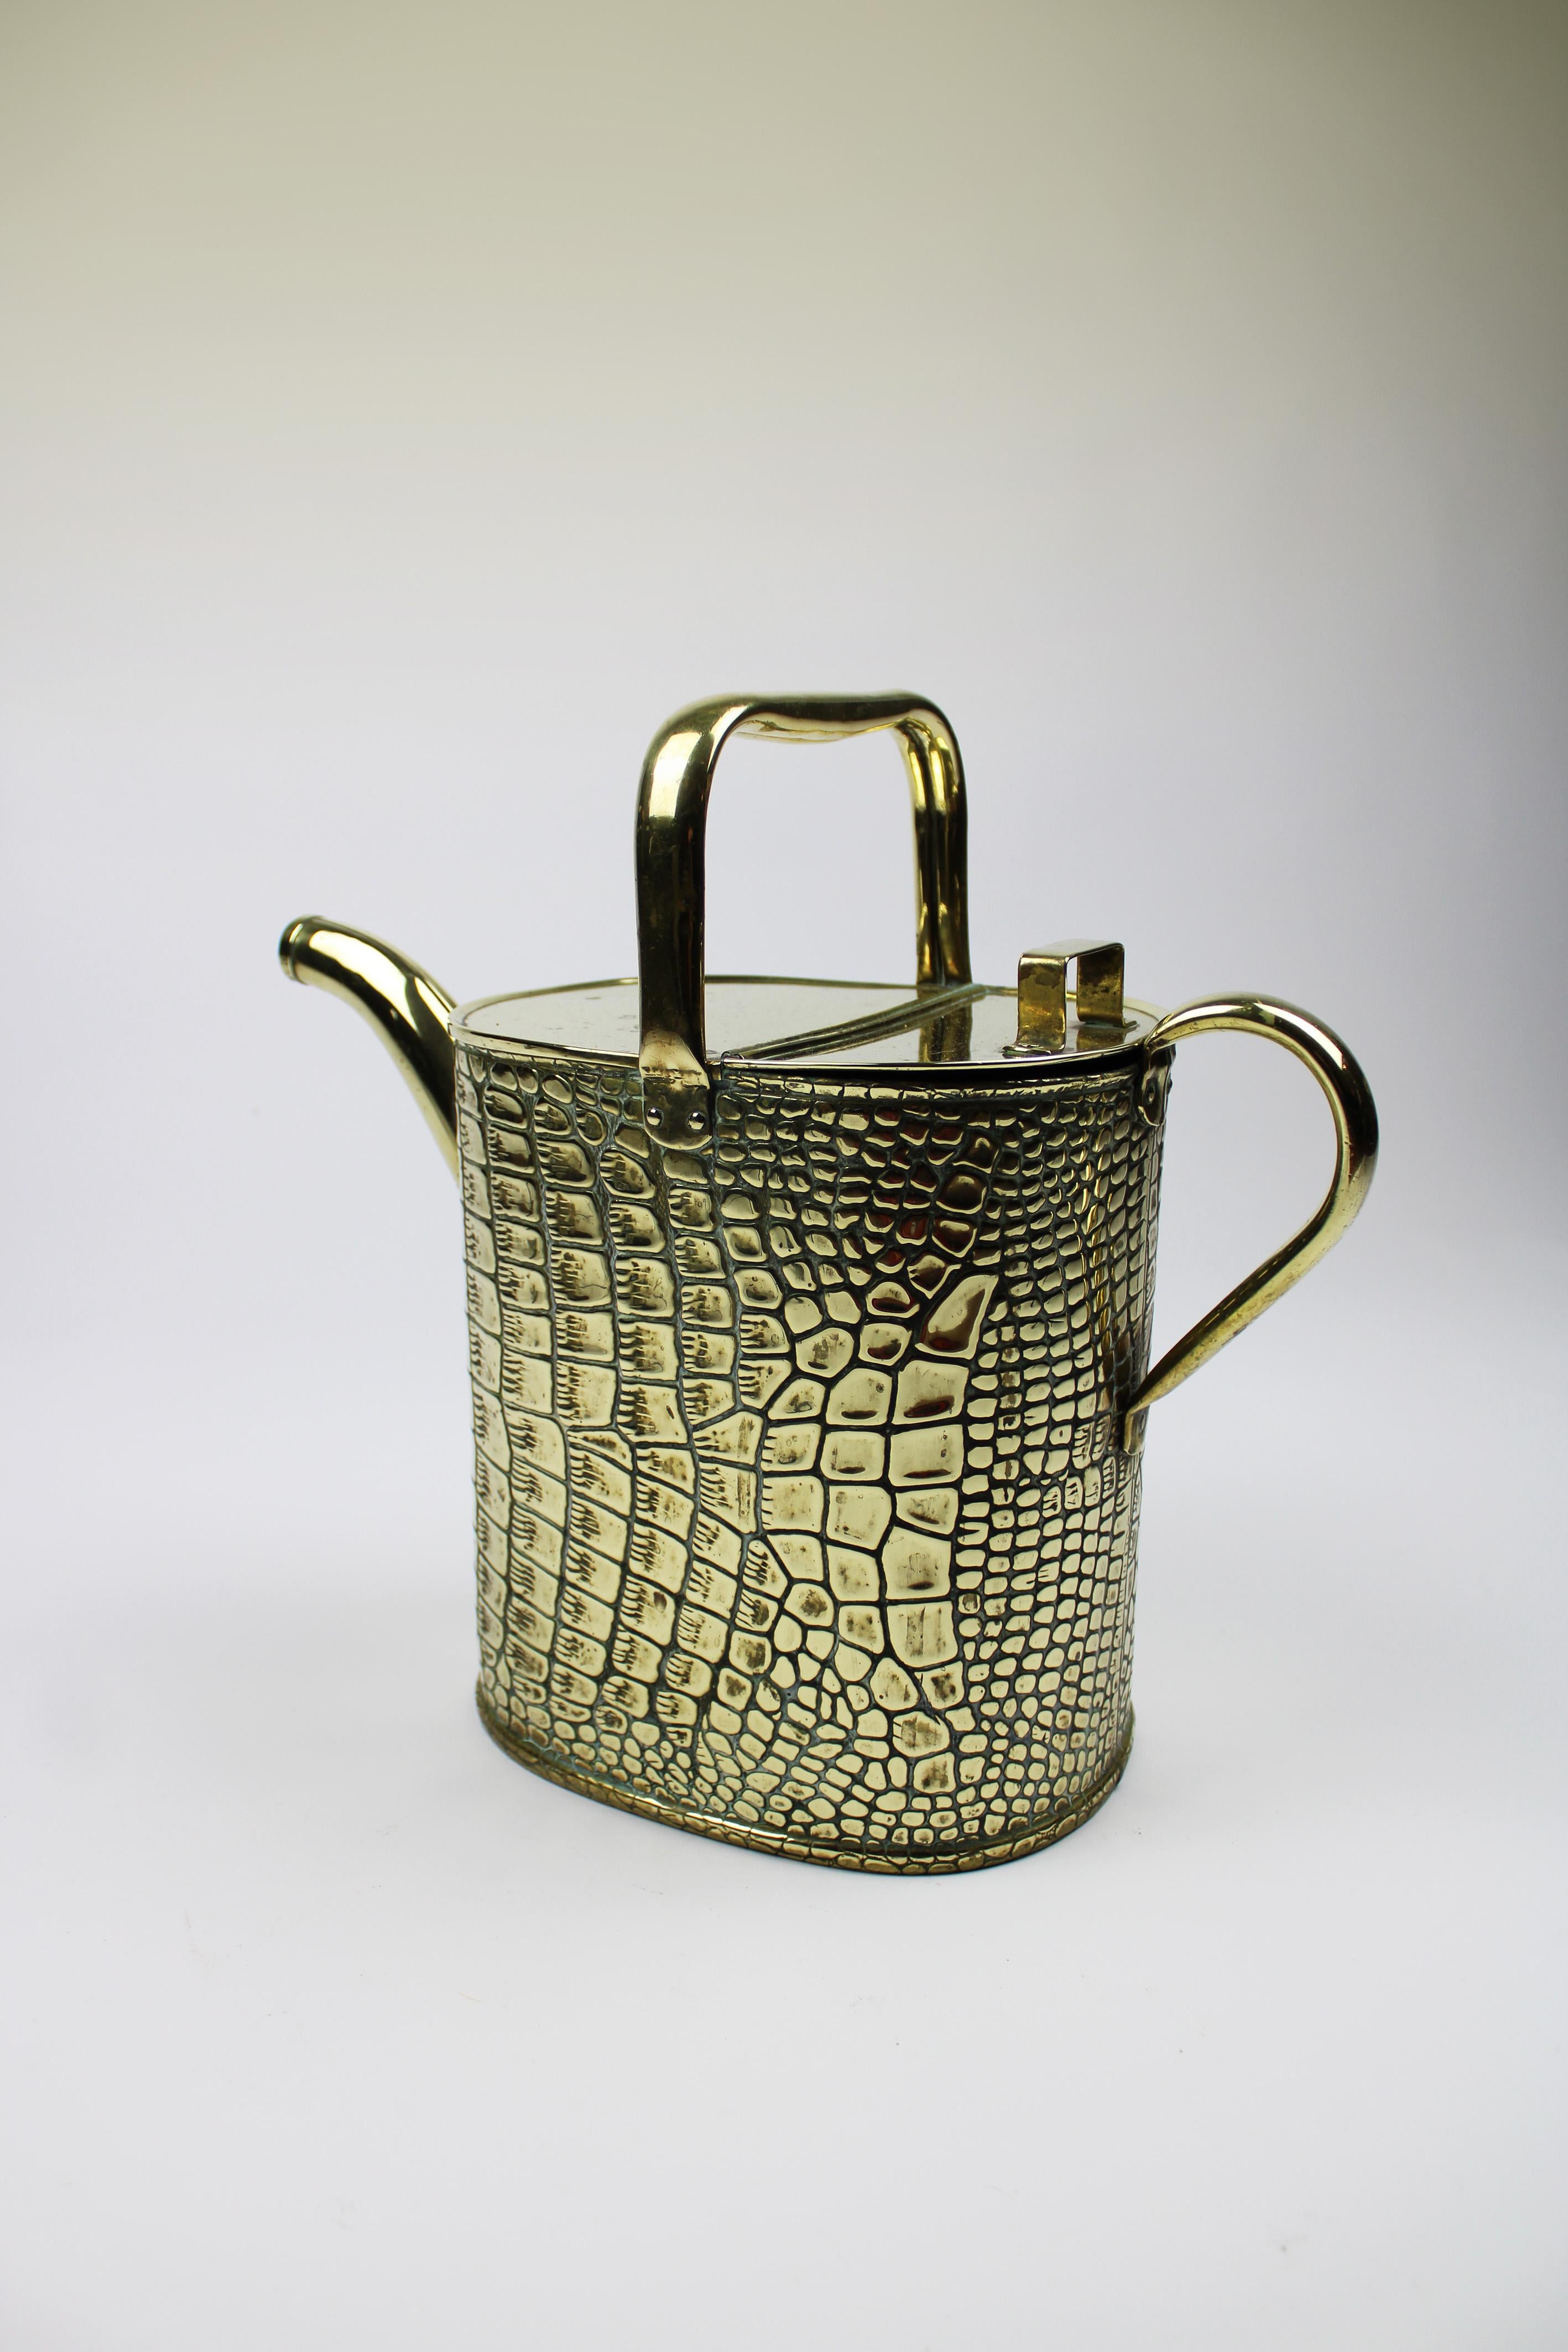 This antique watering can, made of golden brass is a very unusual piece within the manufacture of the famous Wolverhampton Company Joseph Sankey & Sons, which made these watering cans around 1900. The combination of crocodile skin and shape are